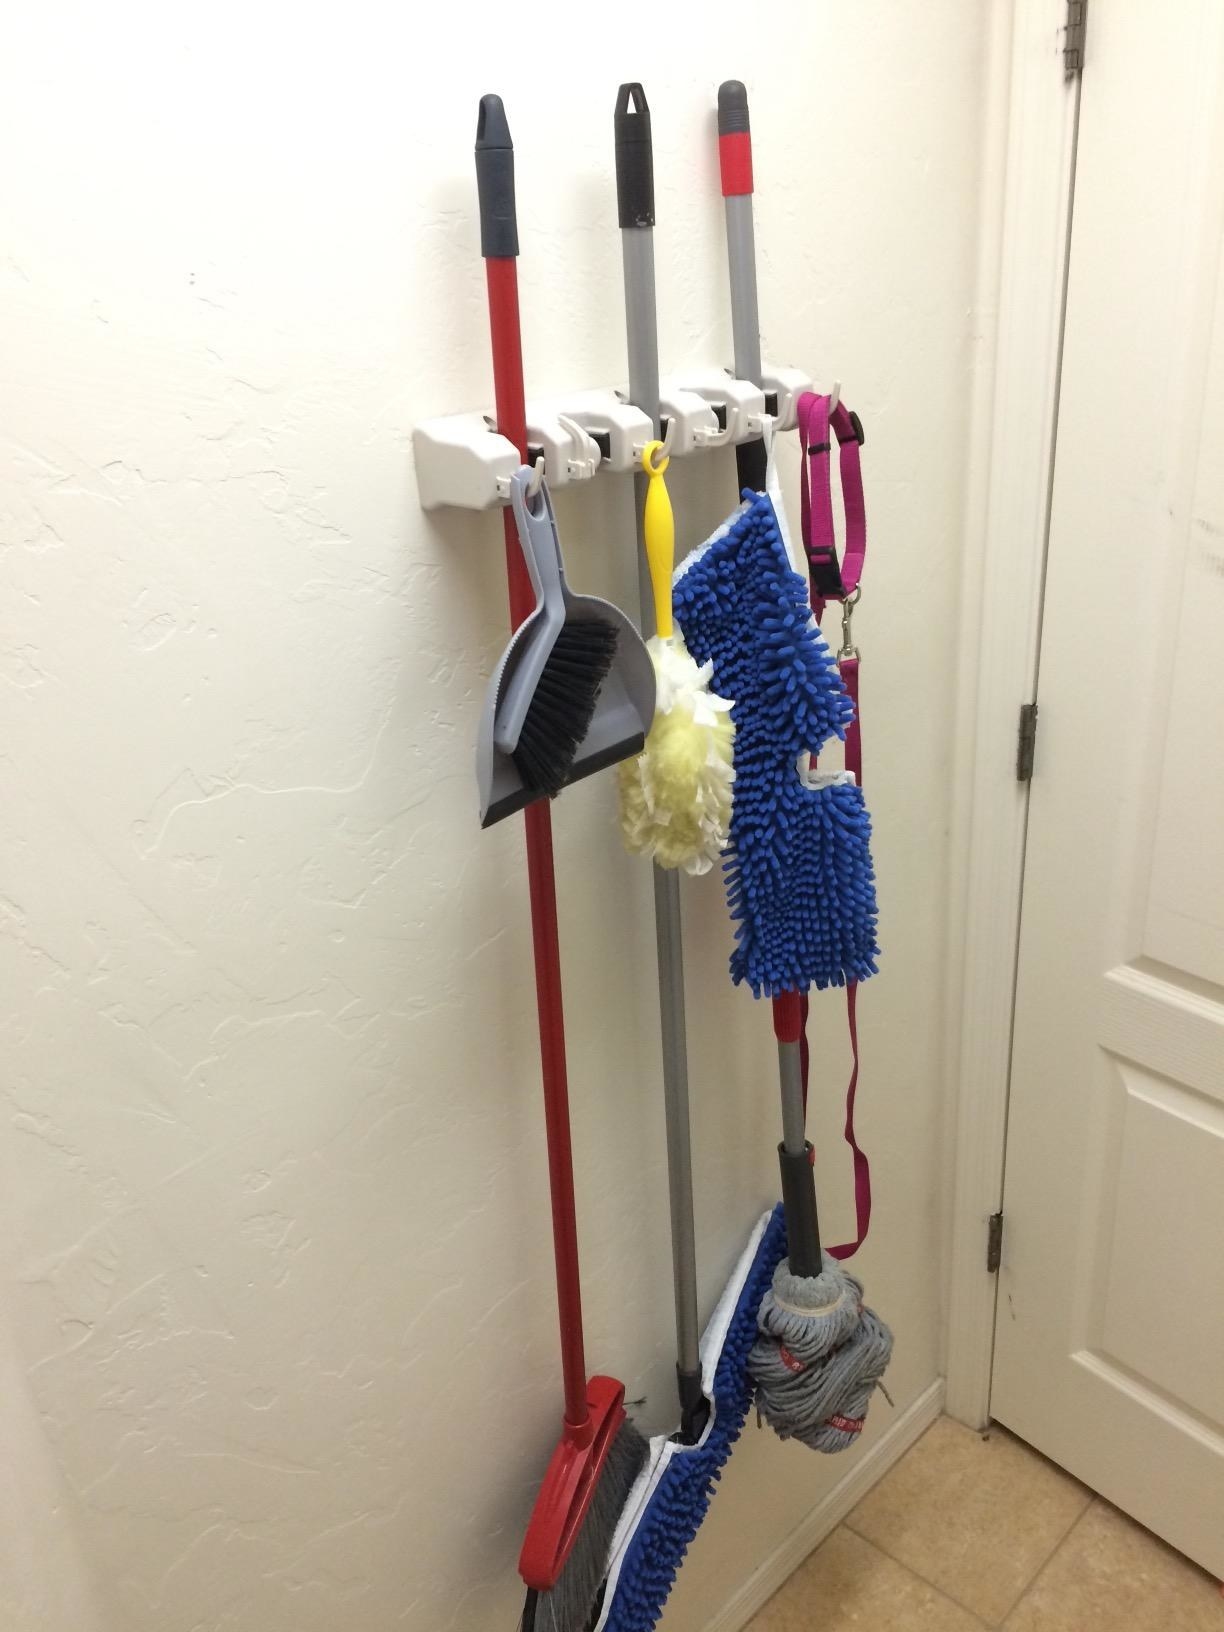 The white rack mounted behind a door with a broom and two styles of mop; plus a Swiffer, a mini broom and dustpan, and the dog&#x27;s leash